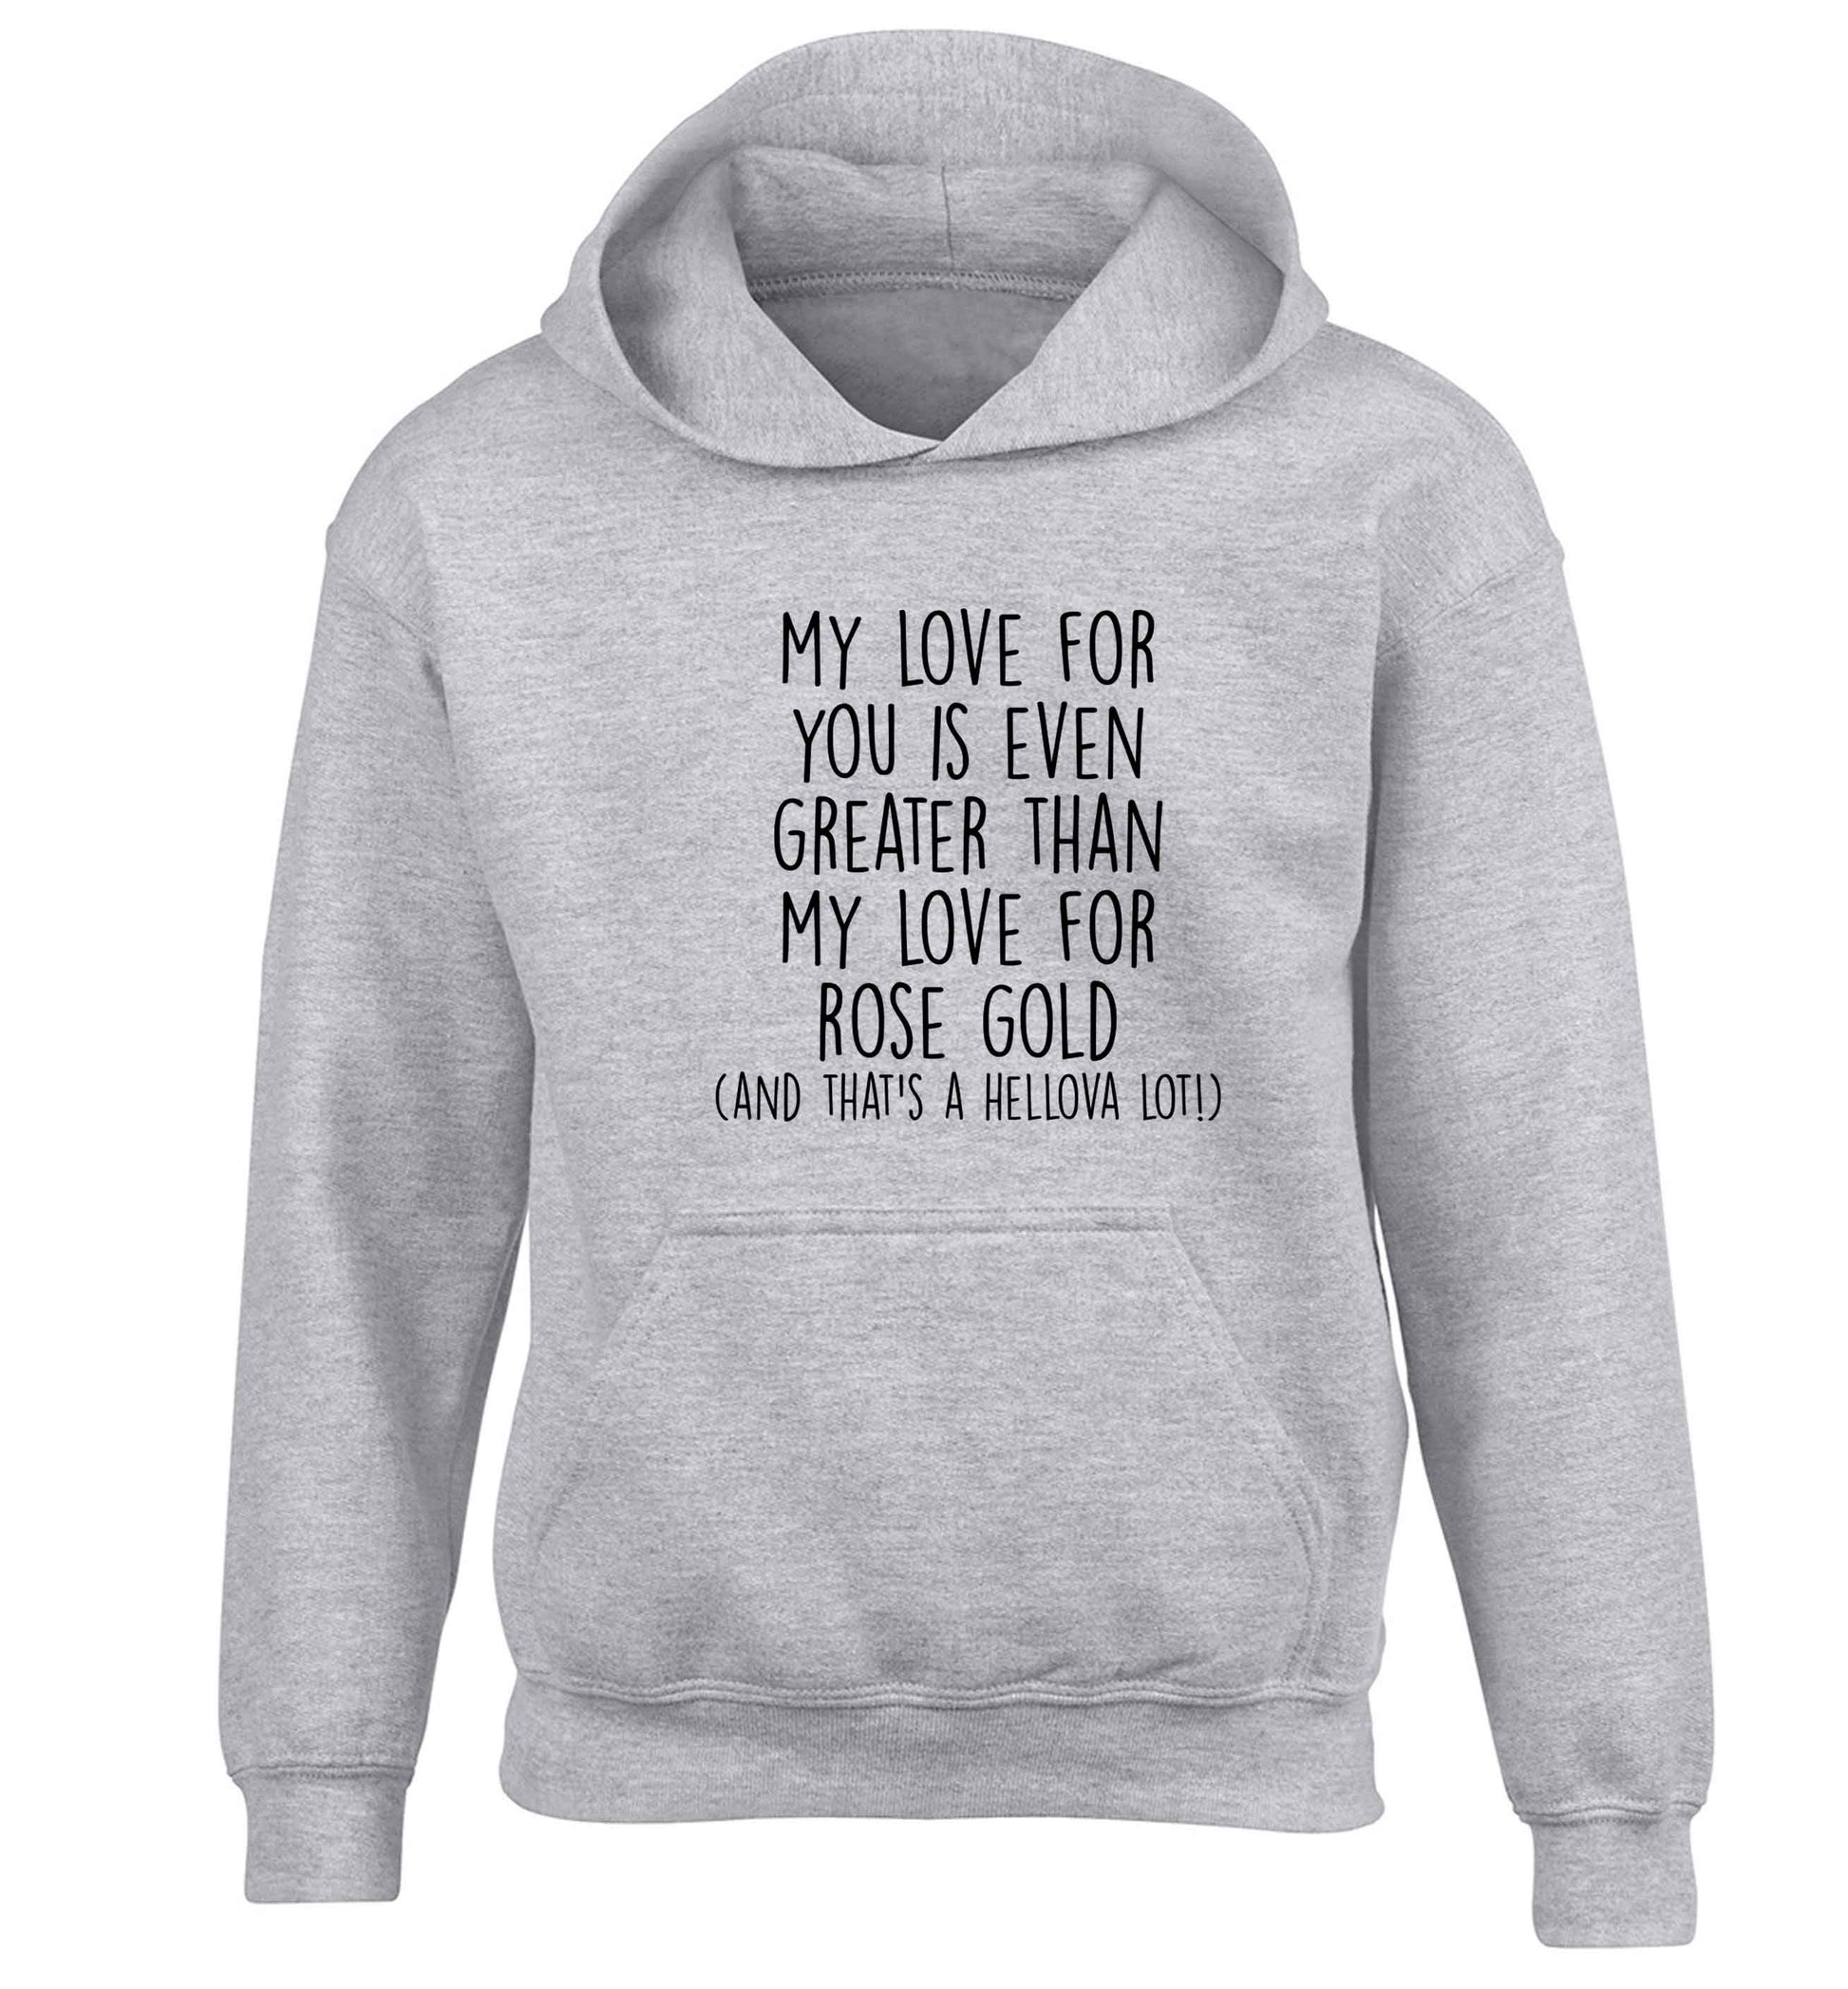 My love for you is even greater than my love for rose gold (and that's a hellova lot) children's grey hoodie 12-13 Years